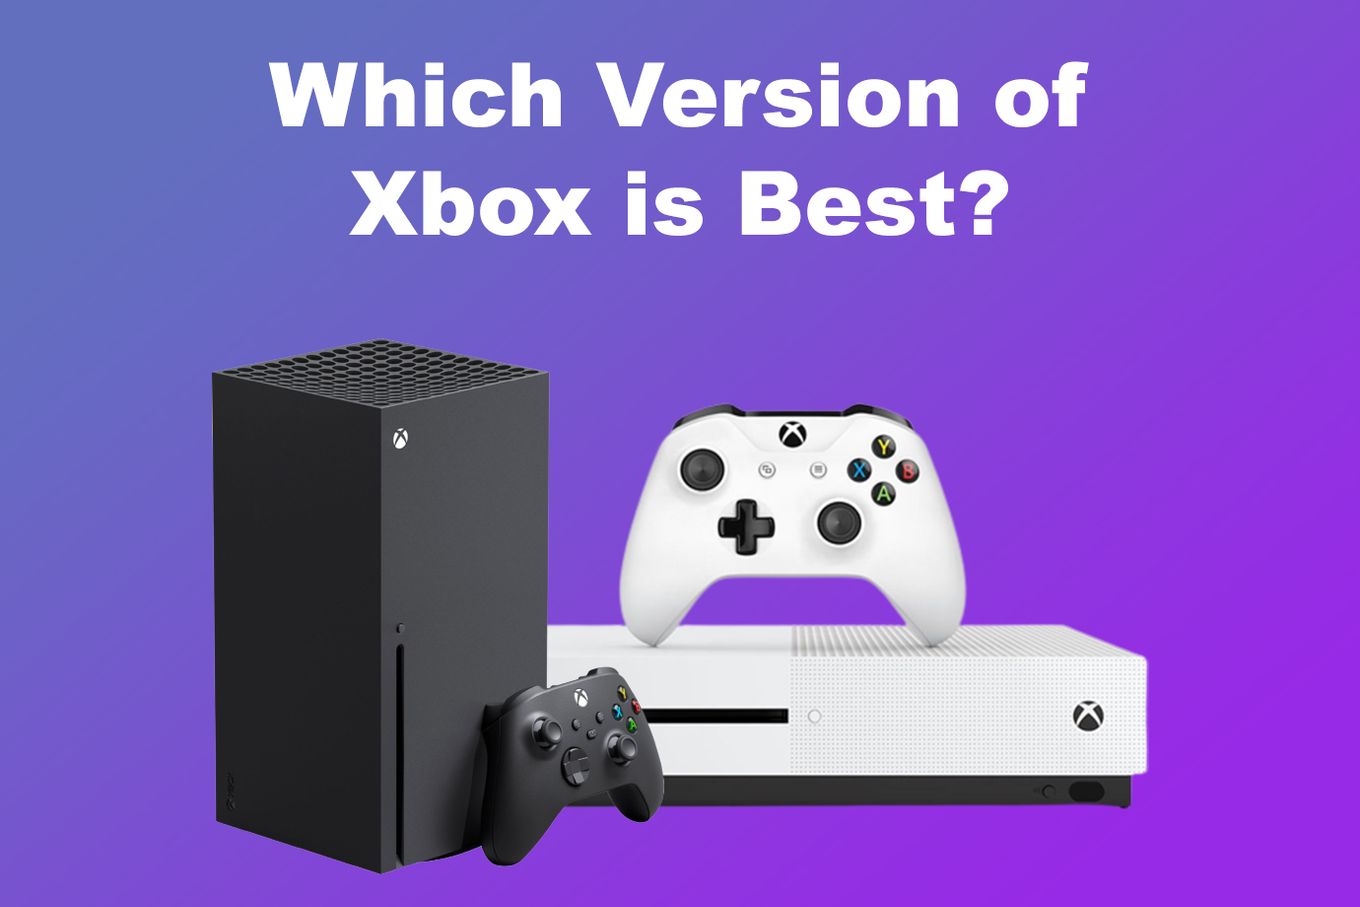 Which Version of Xbox is Best